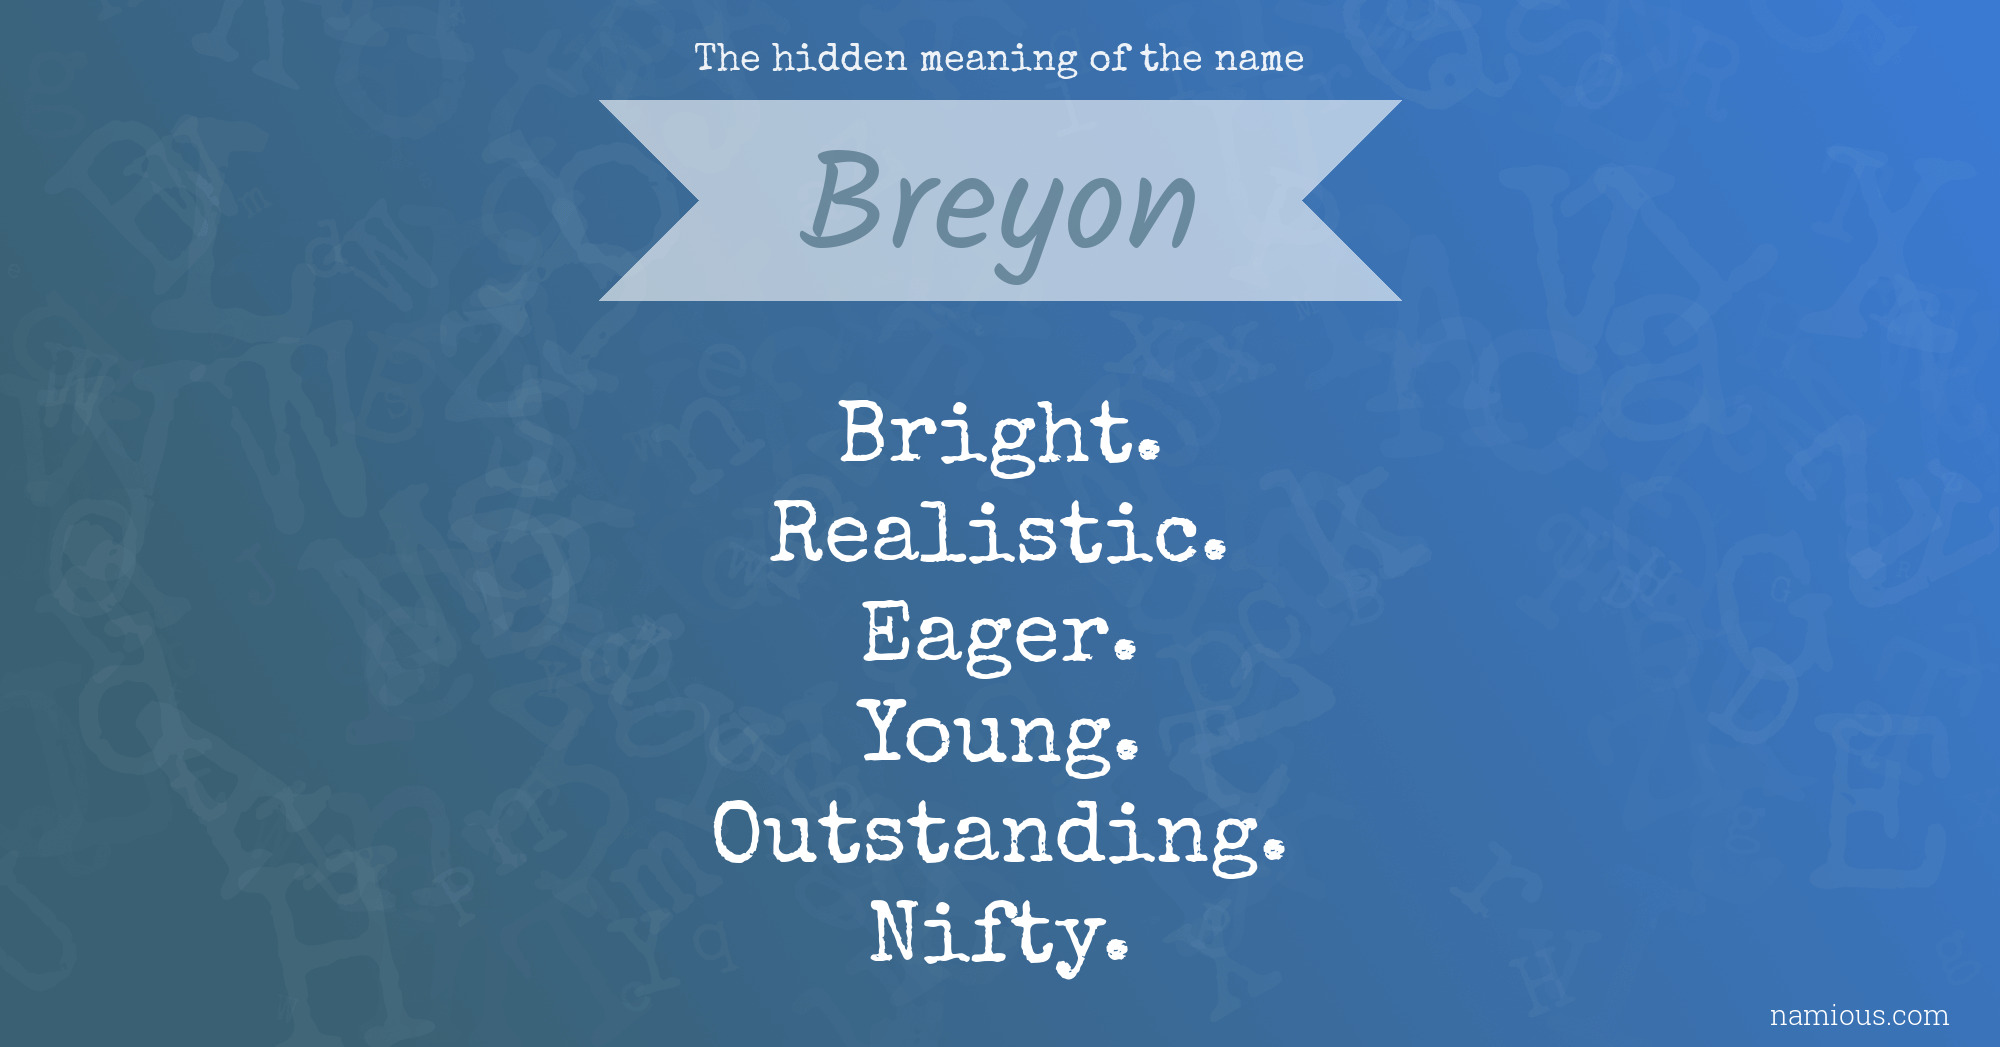 The hidden meaning of the name Breyon